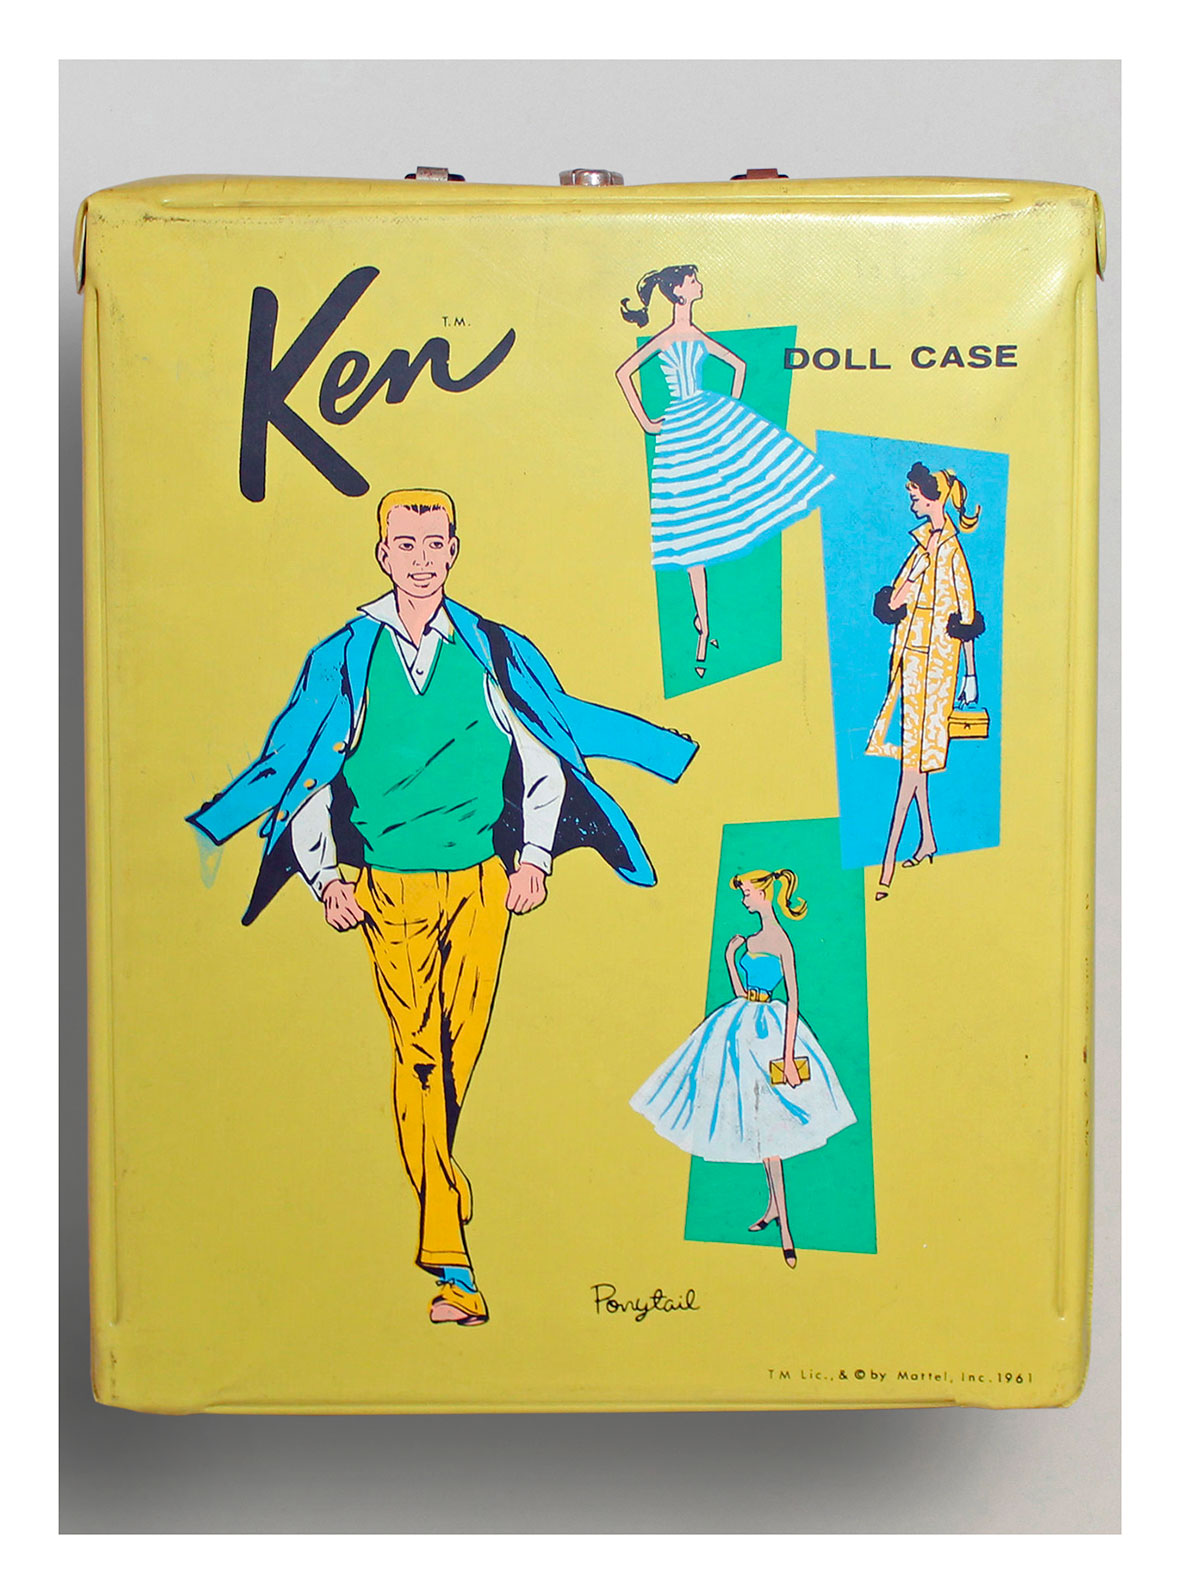 1962 #395 Ken Doll Case by SPP (yellow)